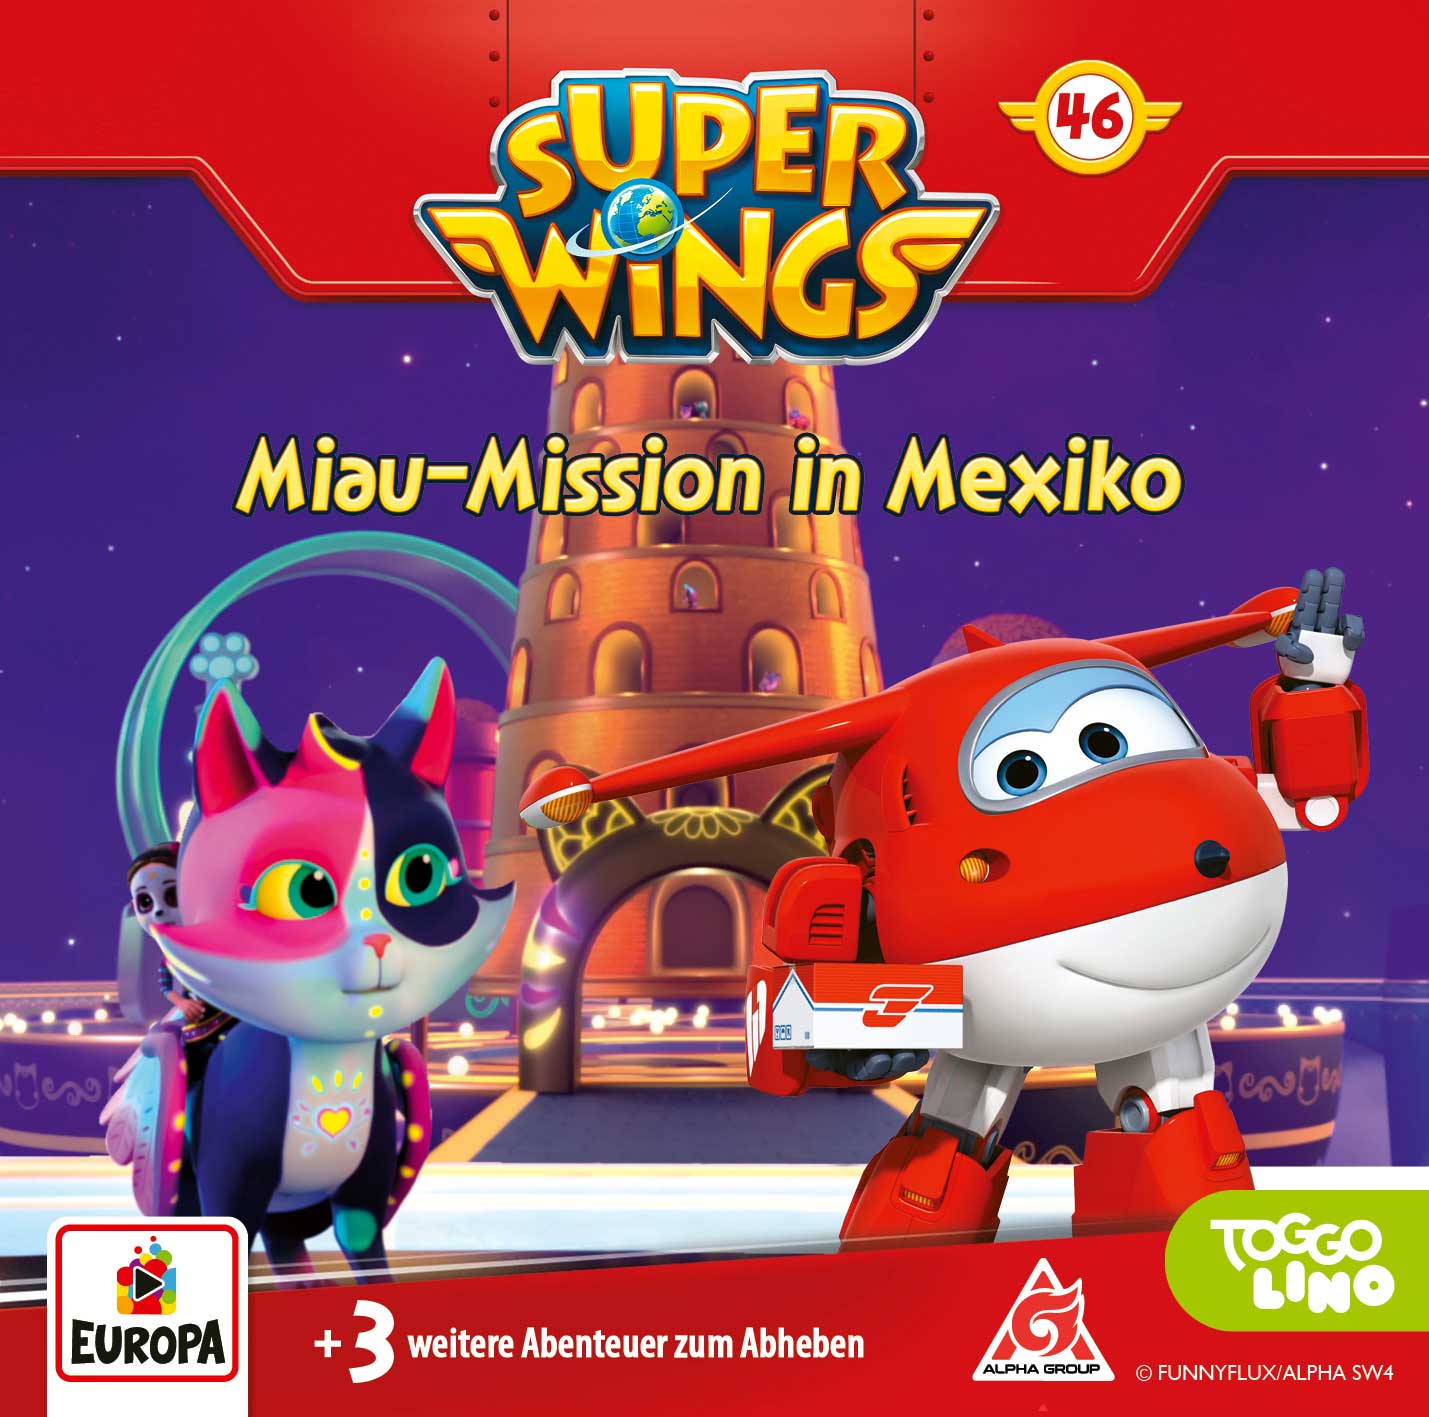 Super Wings - Miau-Mission in Mexiko